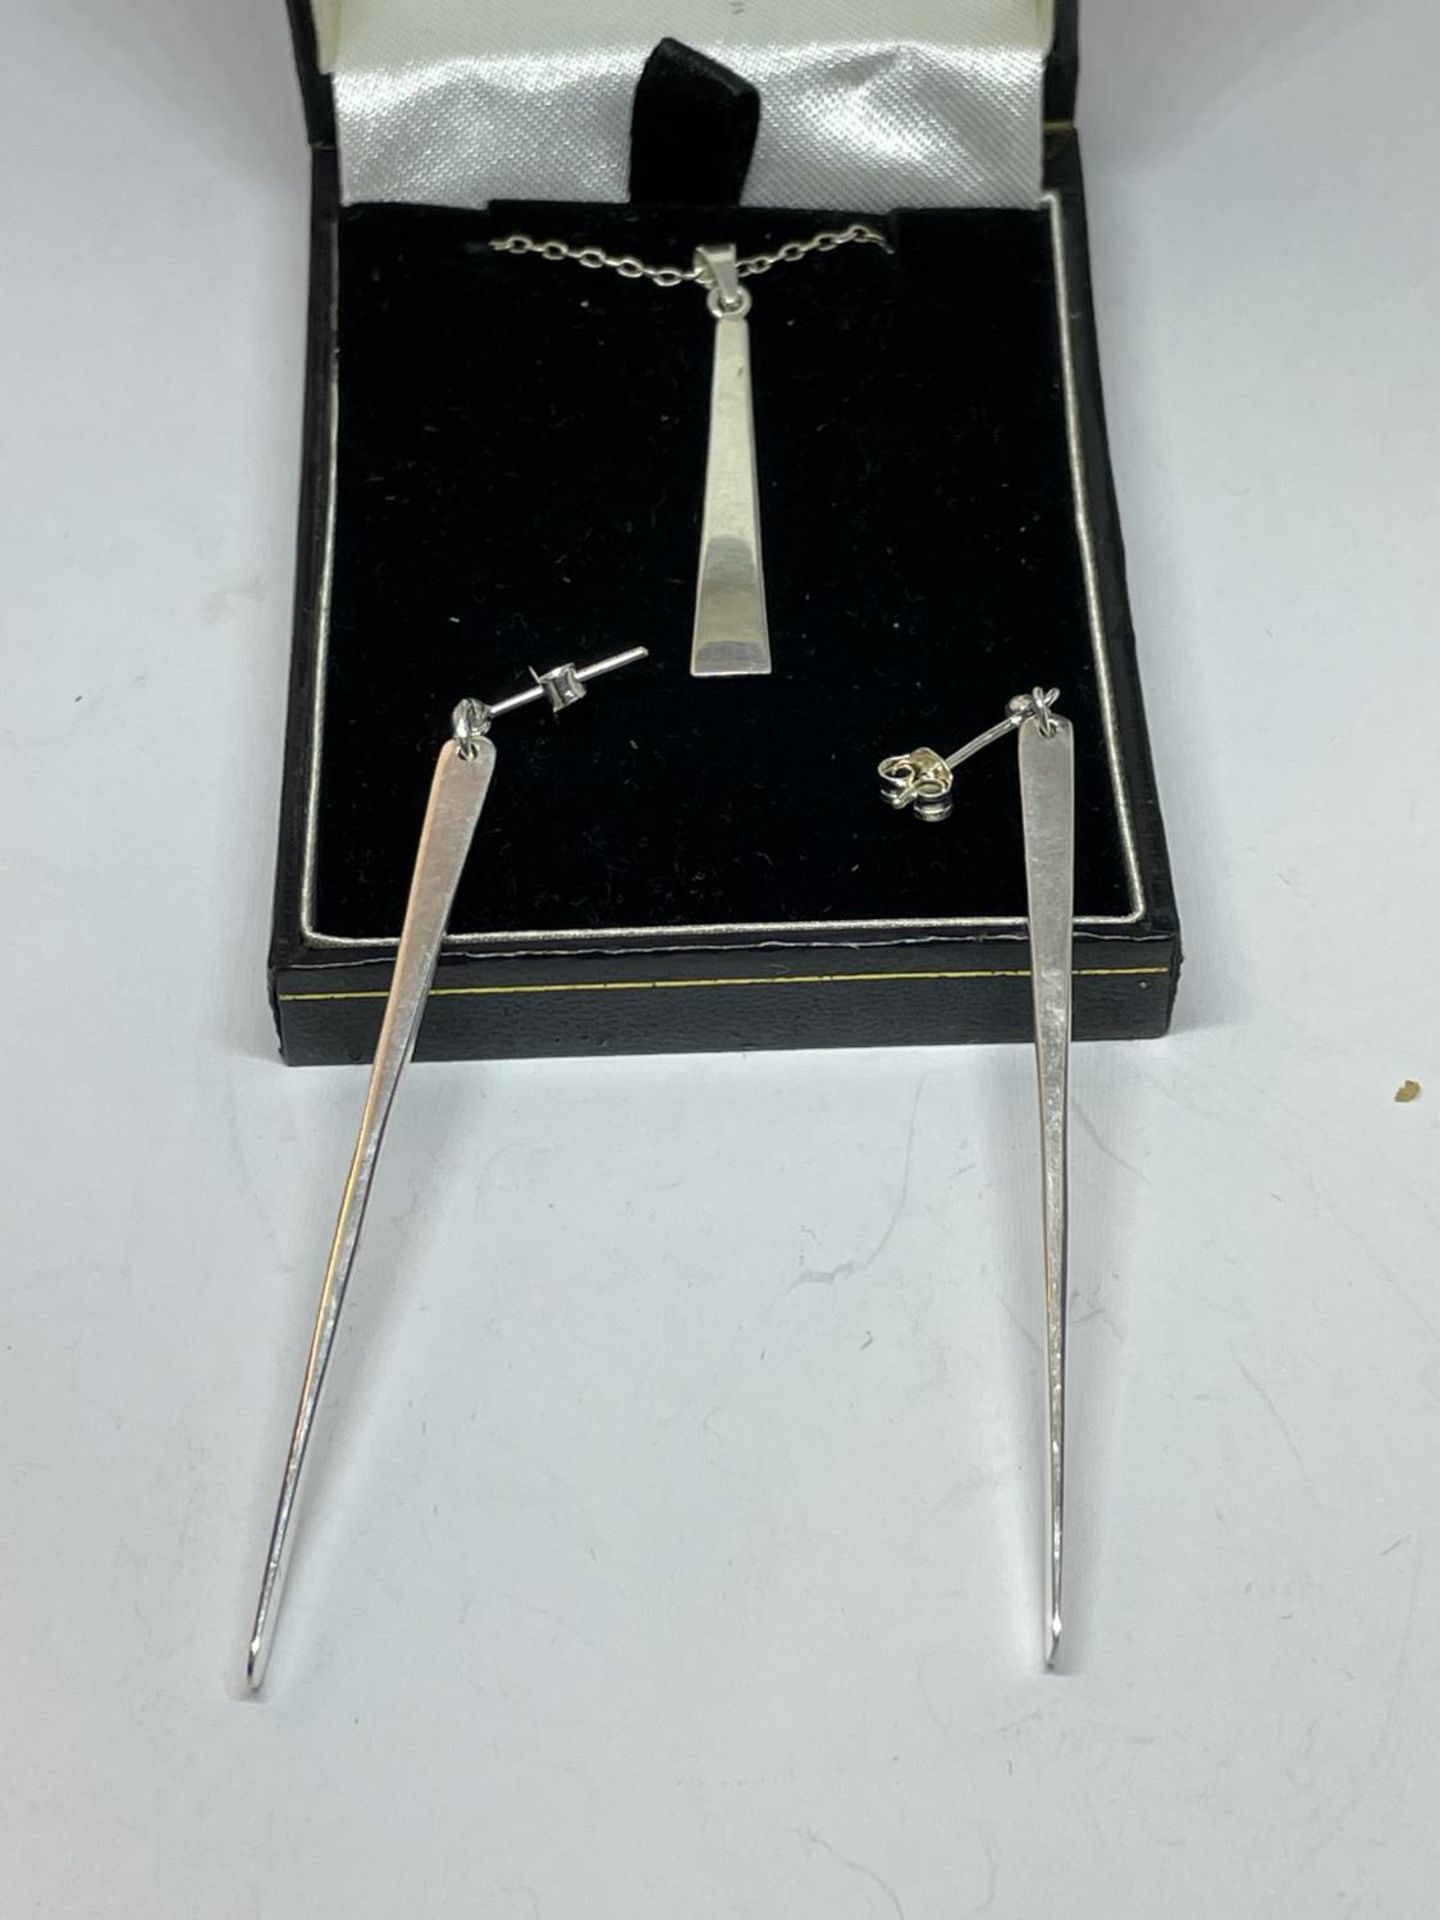 A SILVER NECKLACE WITH PENDANT AND MATCHING EARRING SET IN A PRESENTATION BOX